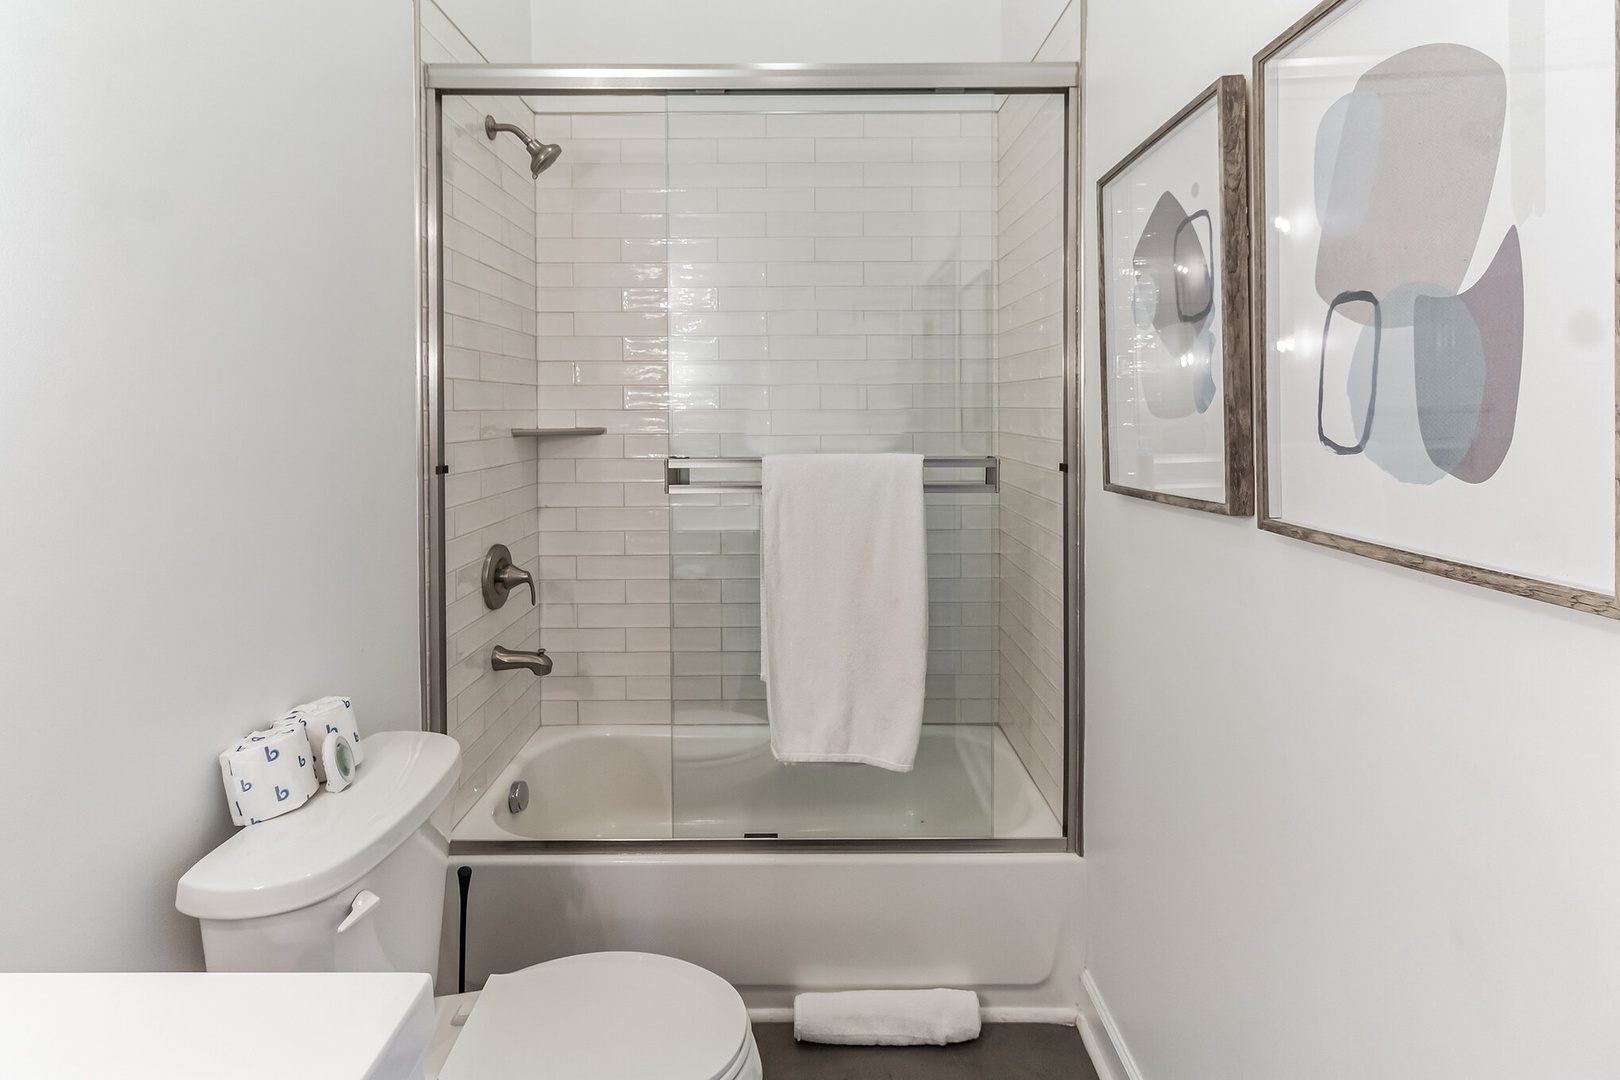 Unit C1: The full bathroom includes a single vanity & shower/tub combo